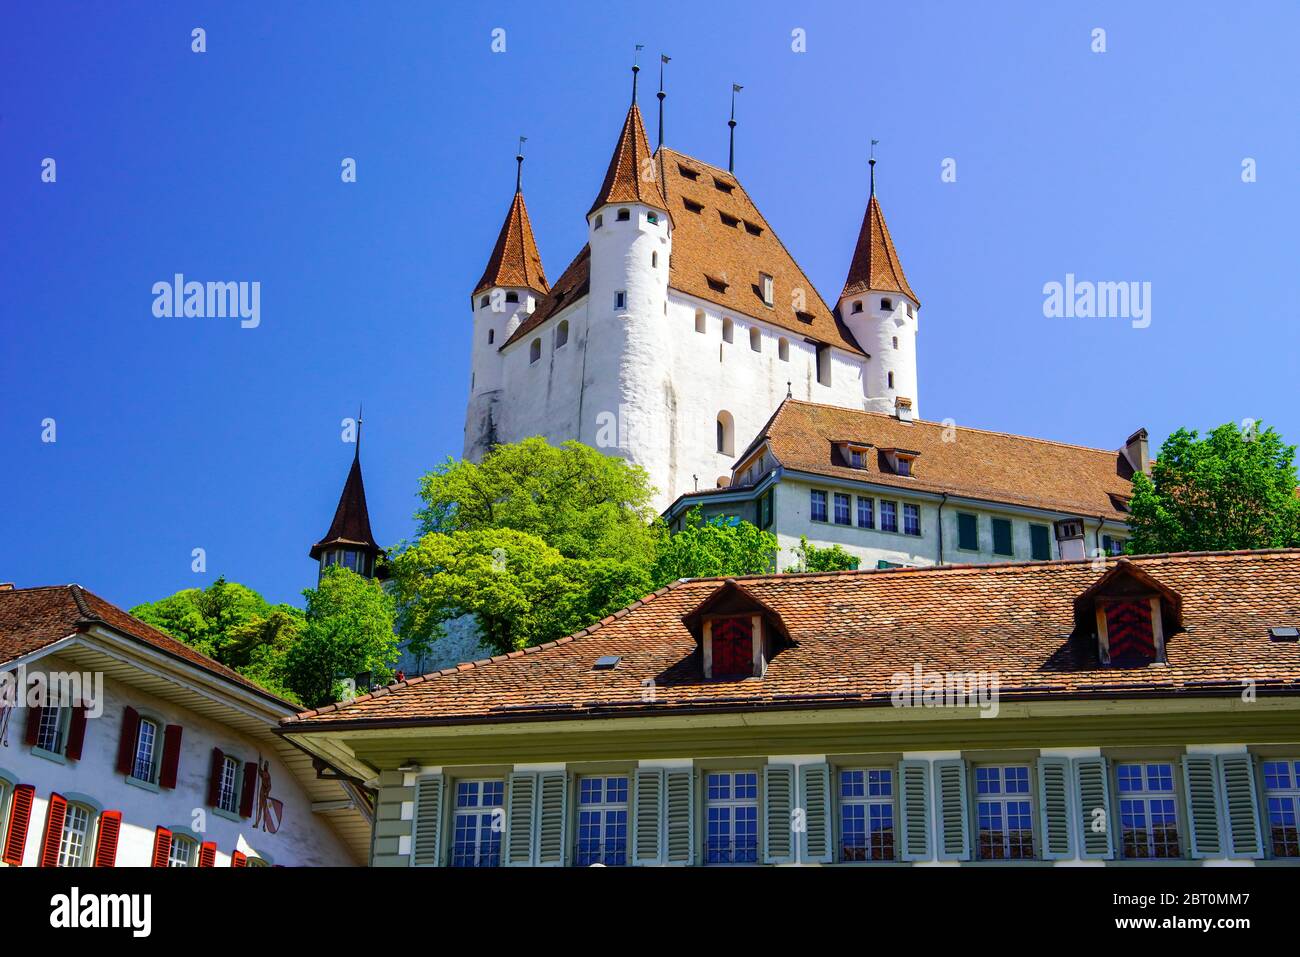 View of the medieval castle high above the old town of Thun was built in the 12th century. Bern canton, Switzerland. Stock Photo